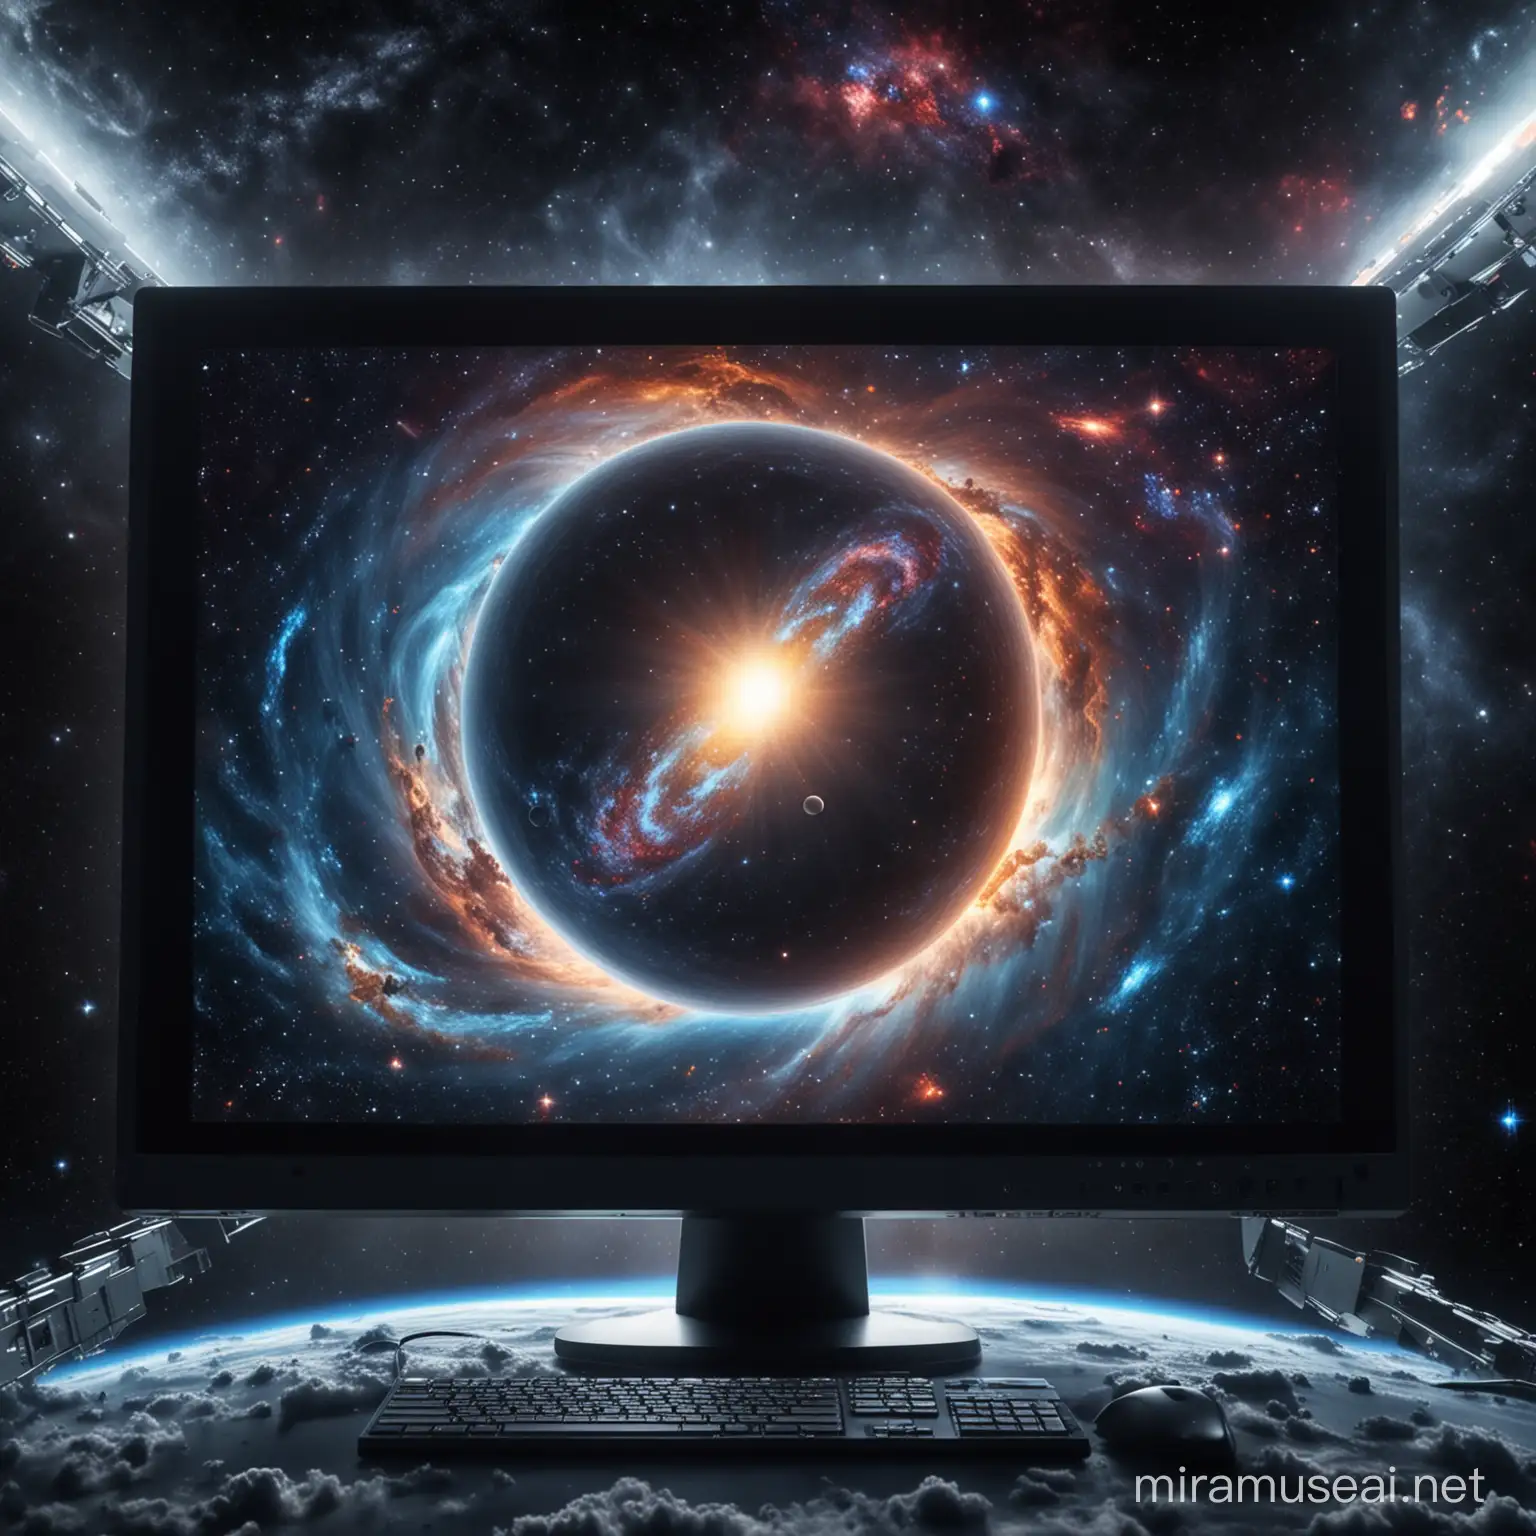 Universe inside of a computer monitor in space